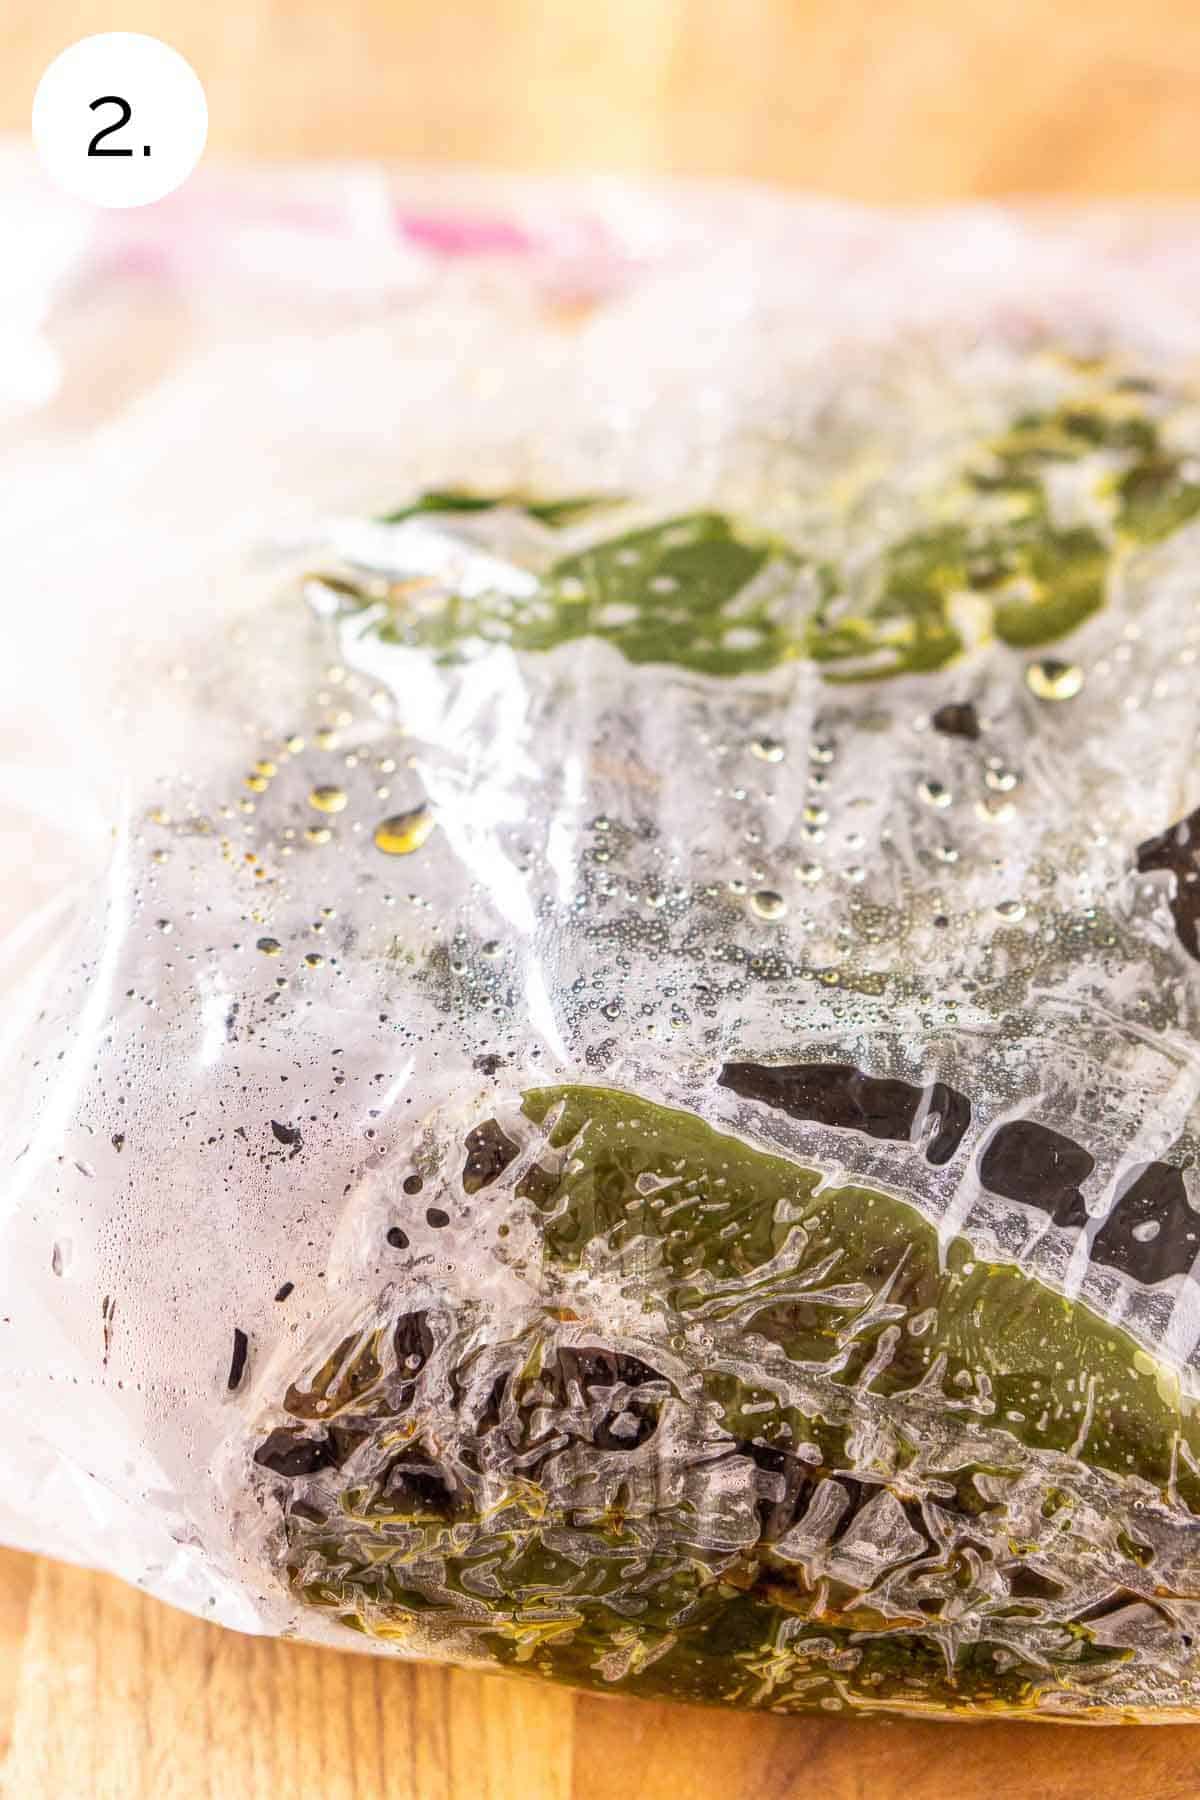 The poblano peppers in a plastic bag after broiling in the oven as the skins soften.